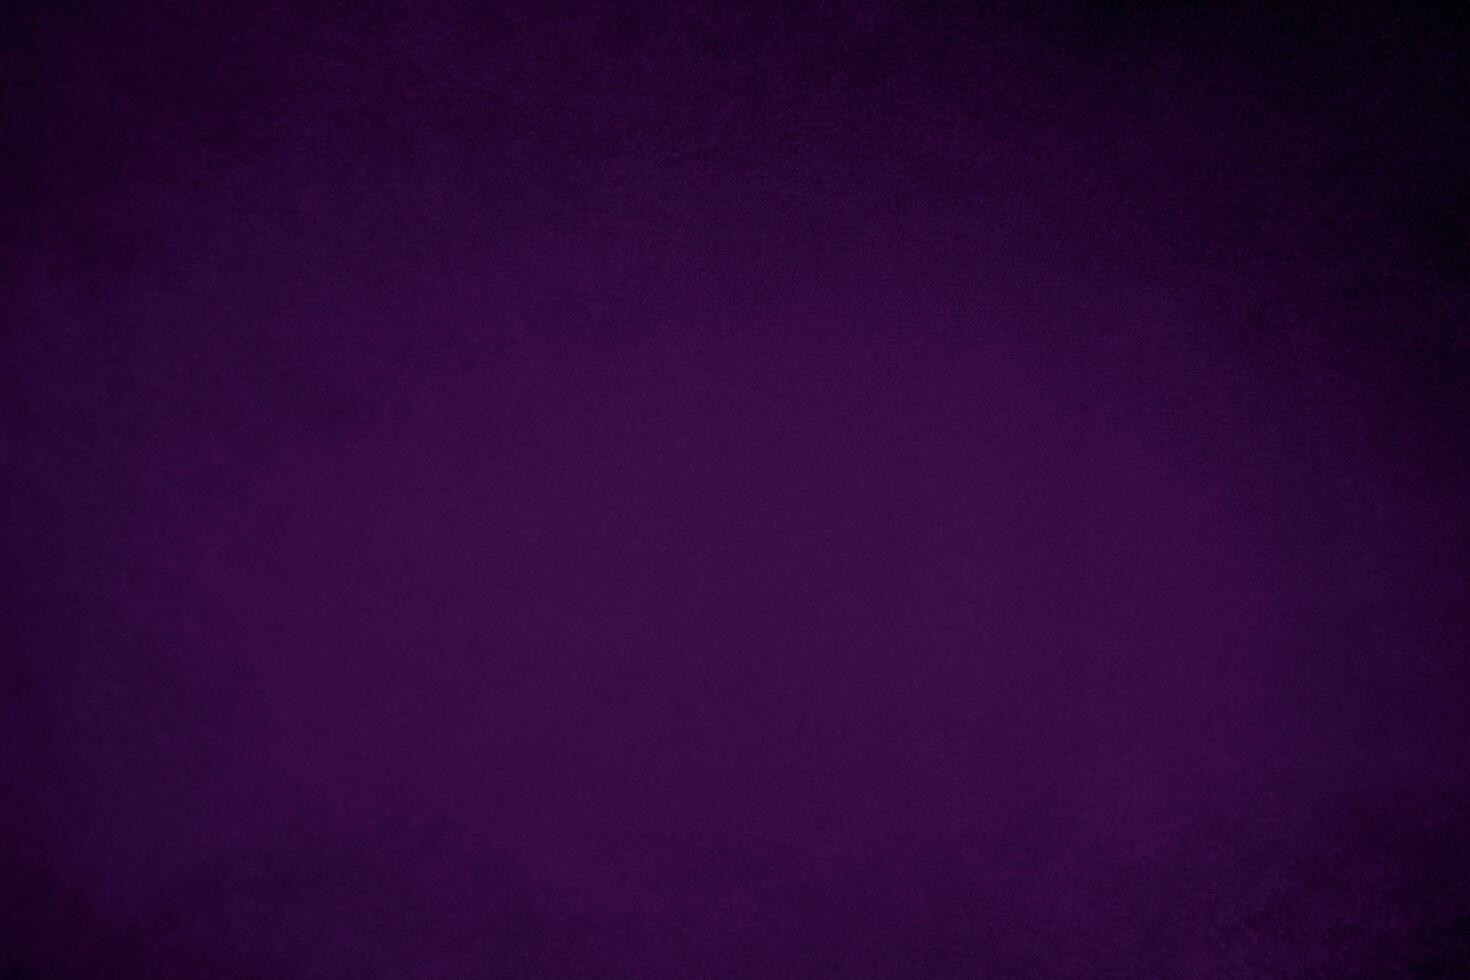 Dark purple velvet fabric texture used as background. Violet color panne fabric background of soft and smooth textile material. crushed velvet .luxury magenta tone for silk. photo